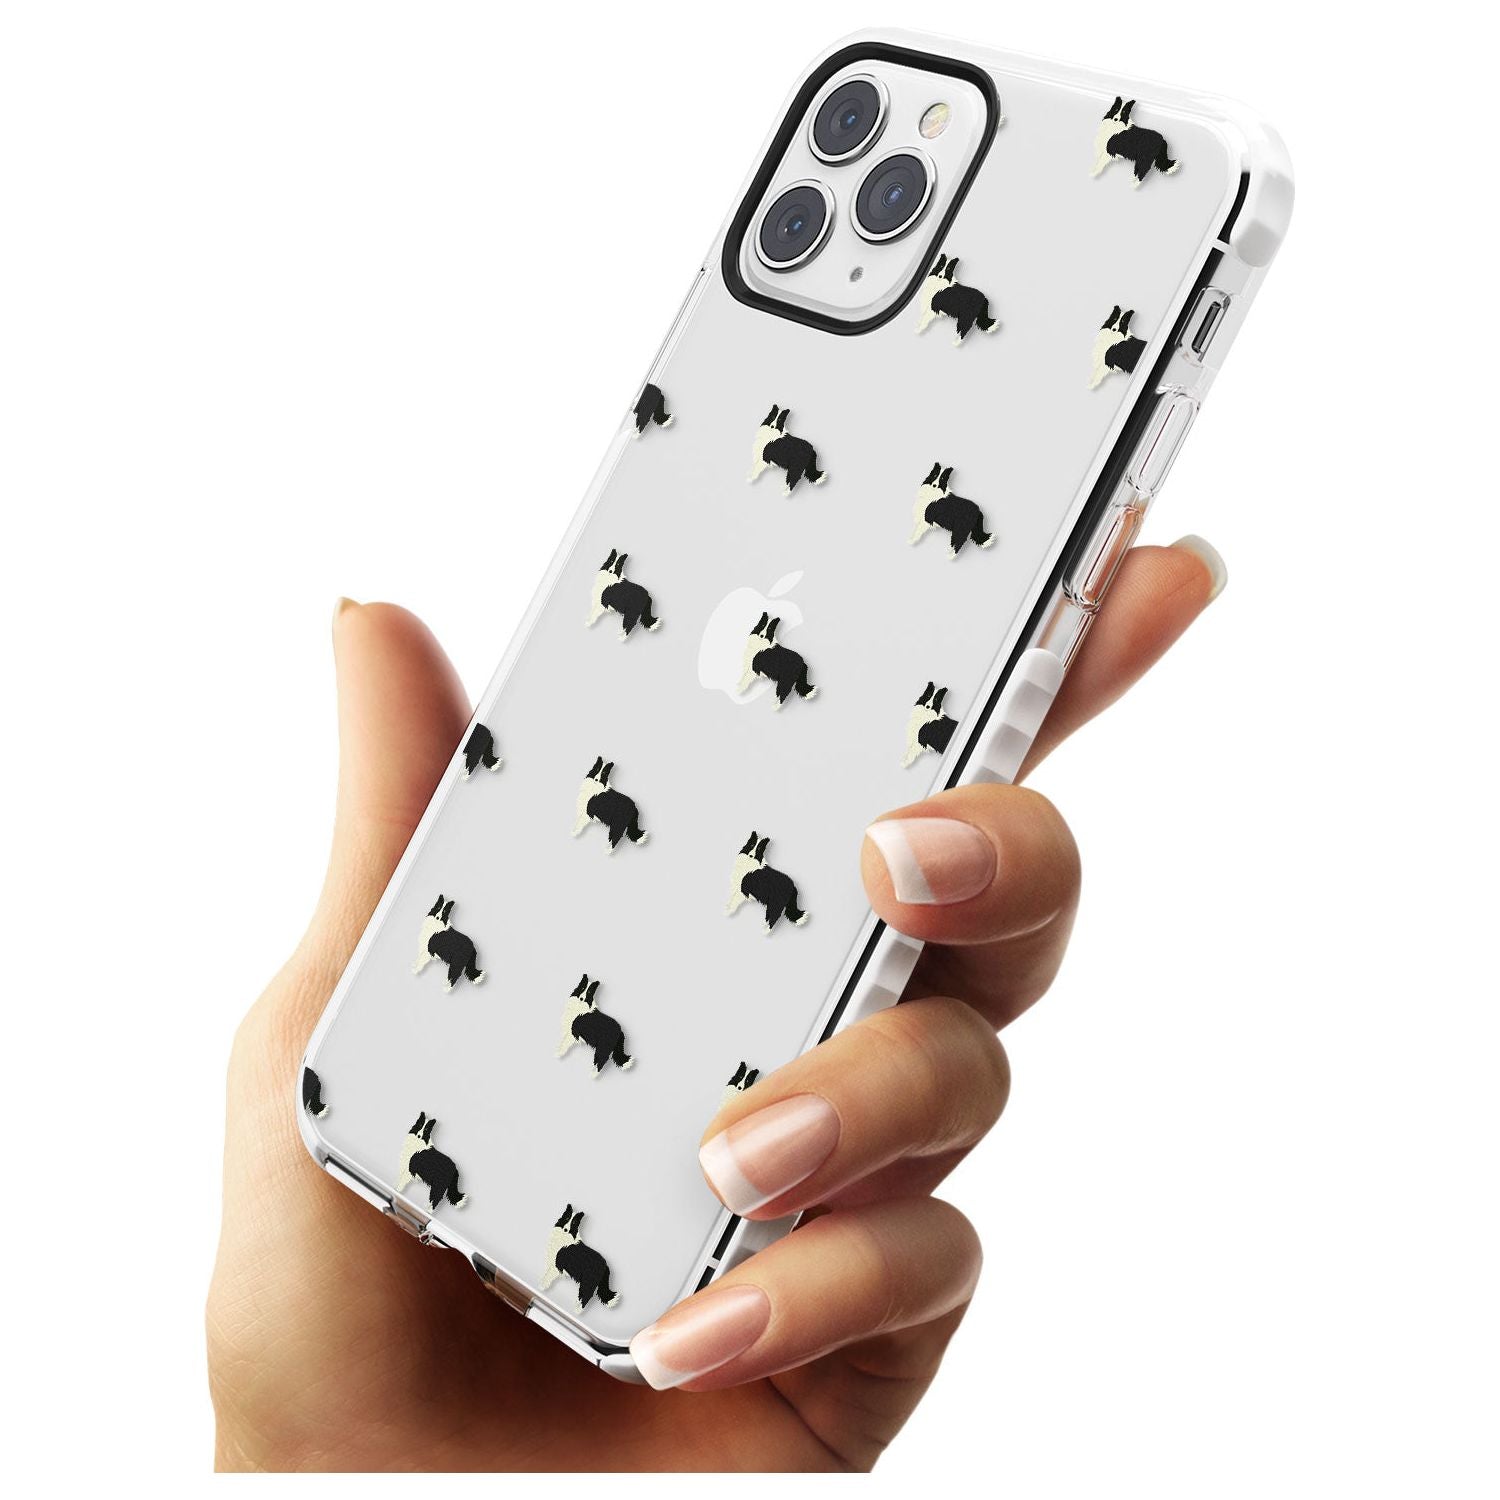 Border Collie Dog Pattern Clear Impact Phone Case for iPhone 11 Pro Max